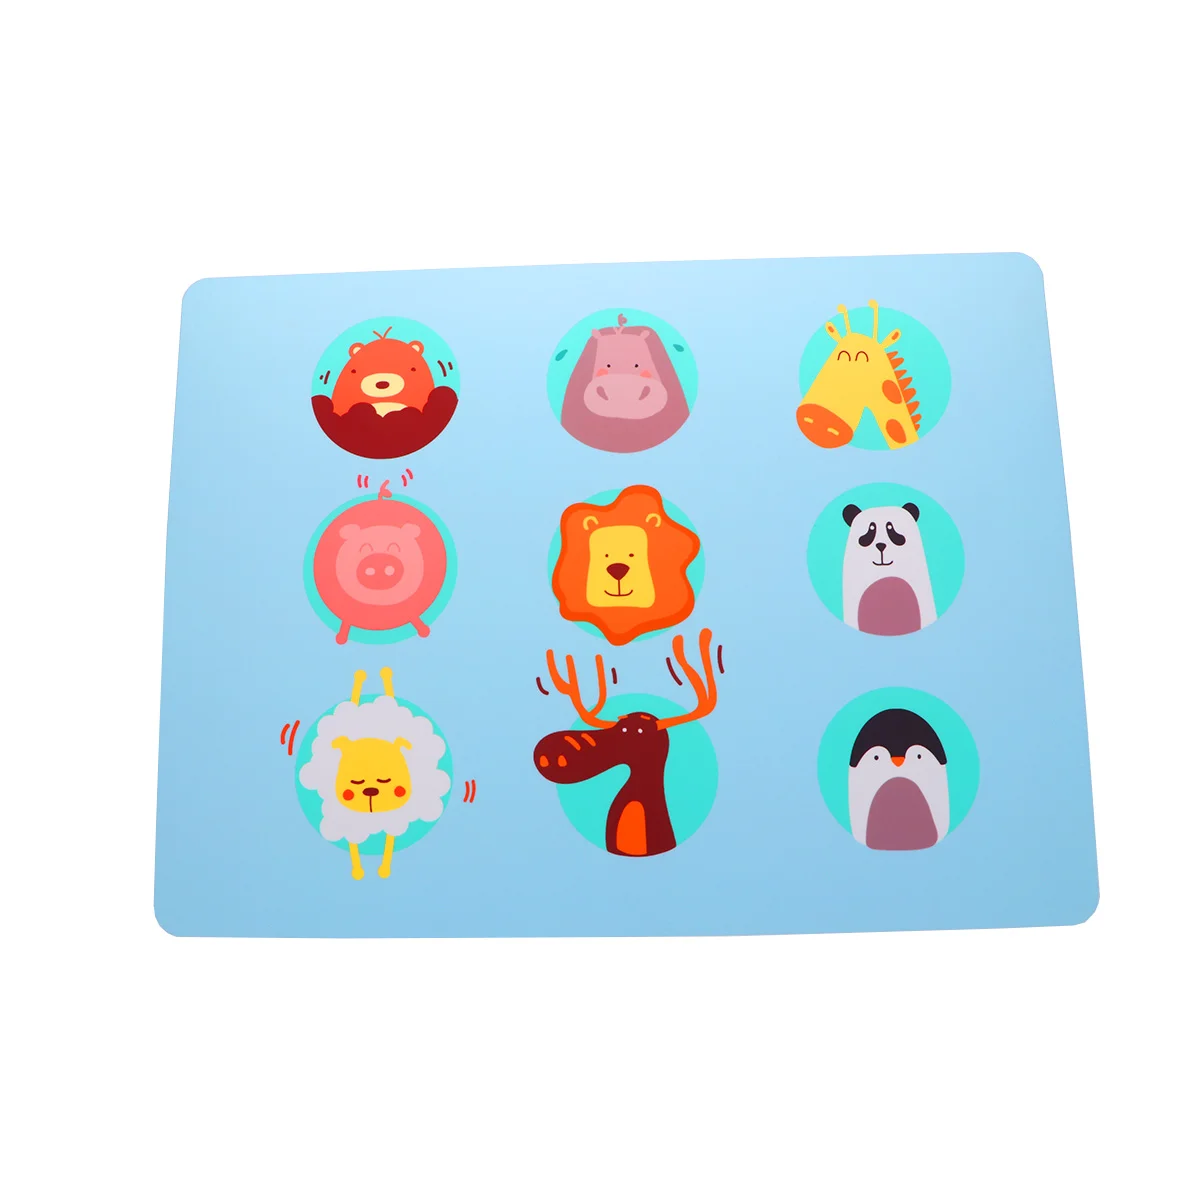 

Silicone Placemat Kids Cartoon Animals Eating Mat Thicken Heat-insulation Mat Table Mat Anti-skid Plate Pad (Blue Animal World)